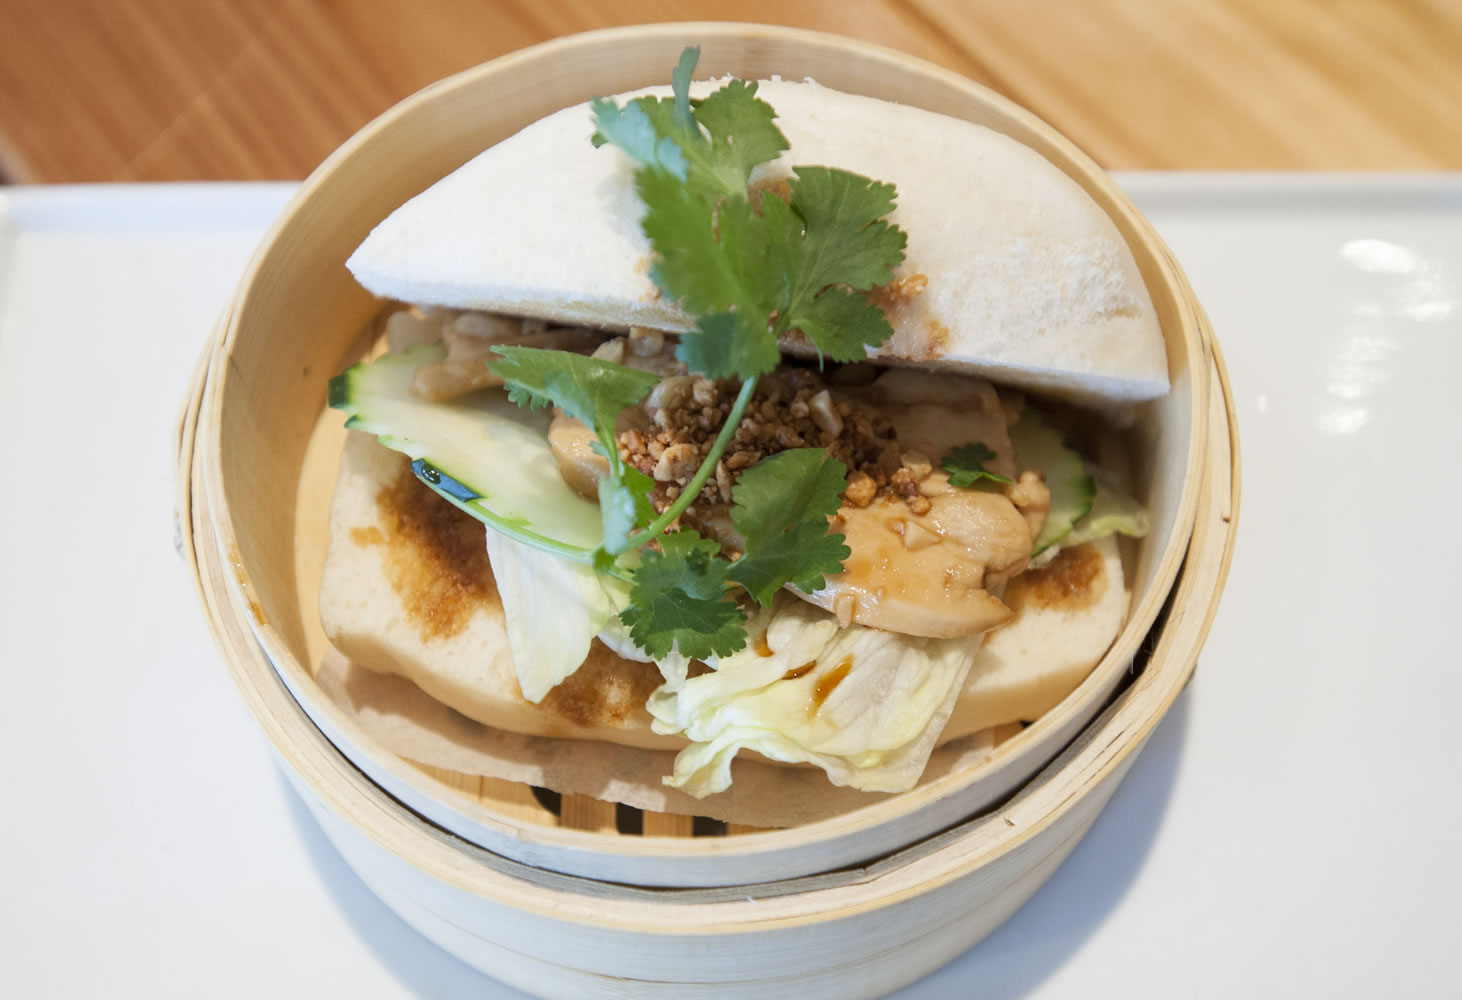 Bao bao, a steamed fluffy bun with grilled marinated chicken, veggies and peanut is served at the I am Thai Eatery in Vancouver.